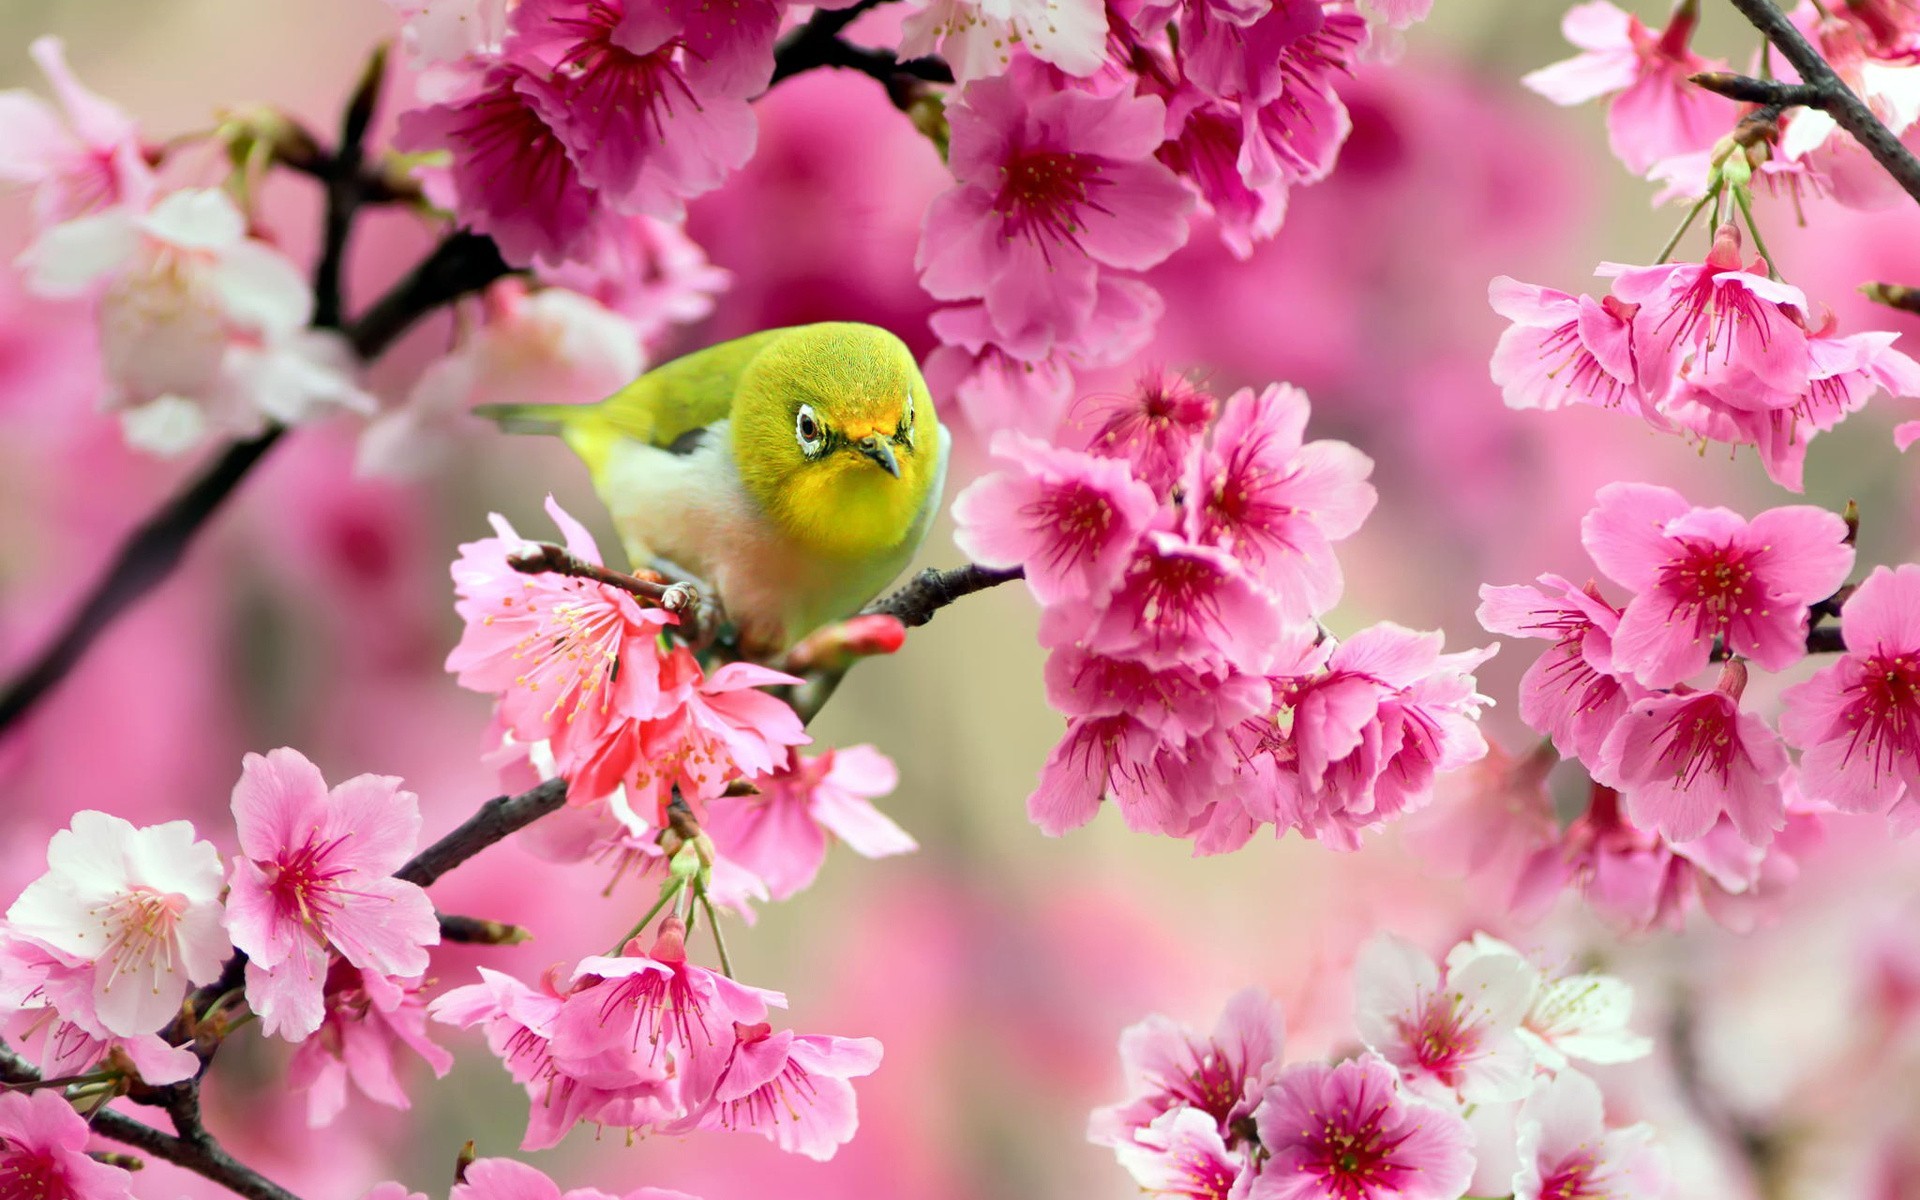 General 1920x1200 birds animals pink flowers blossoms flowers colorful pink yellow bird closeup